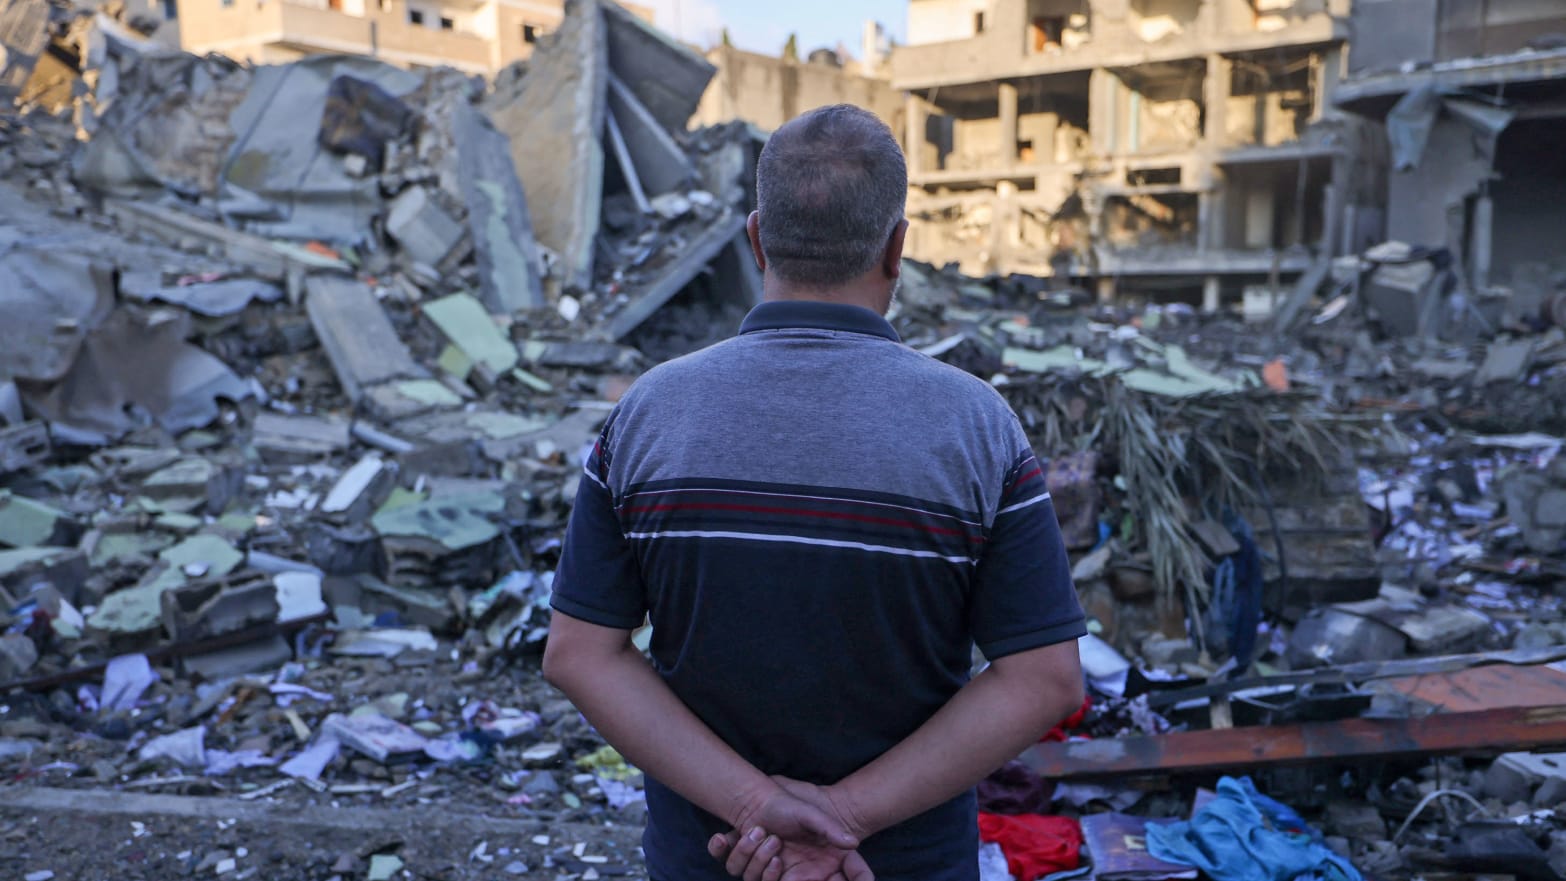 A Palestinian man looks on amid the rubble of buildings destroyed during Israeli airstrikes in the Rafah refugee camp in the southern of Gaza Strip.